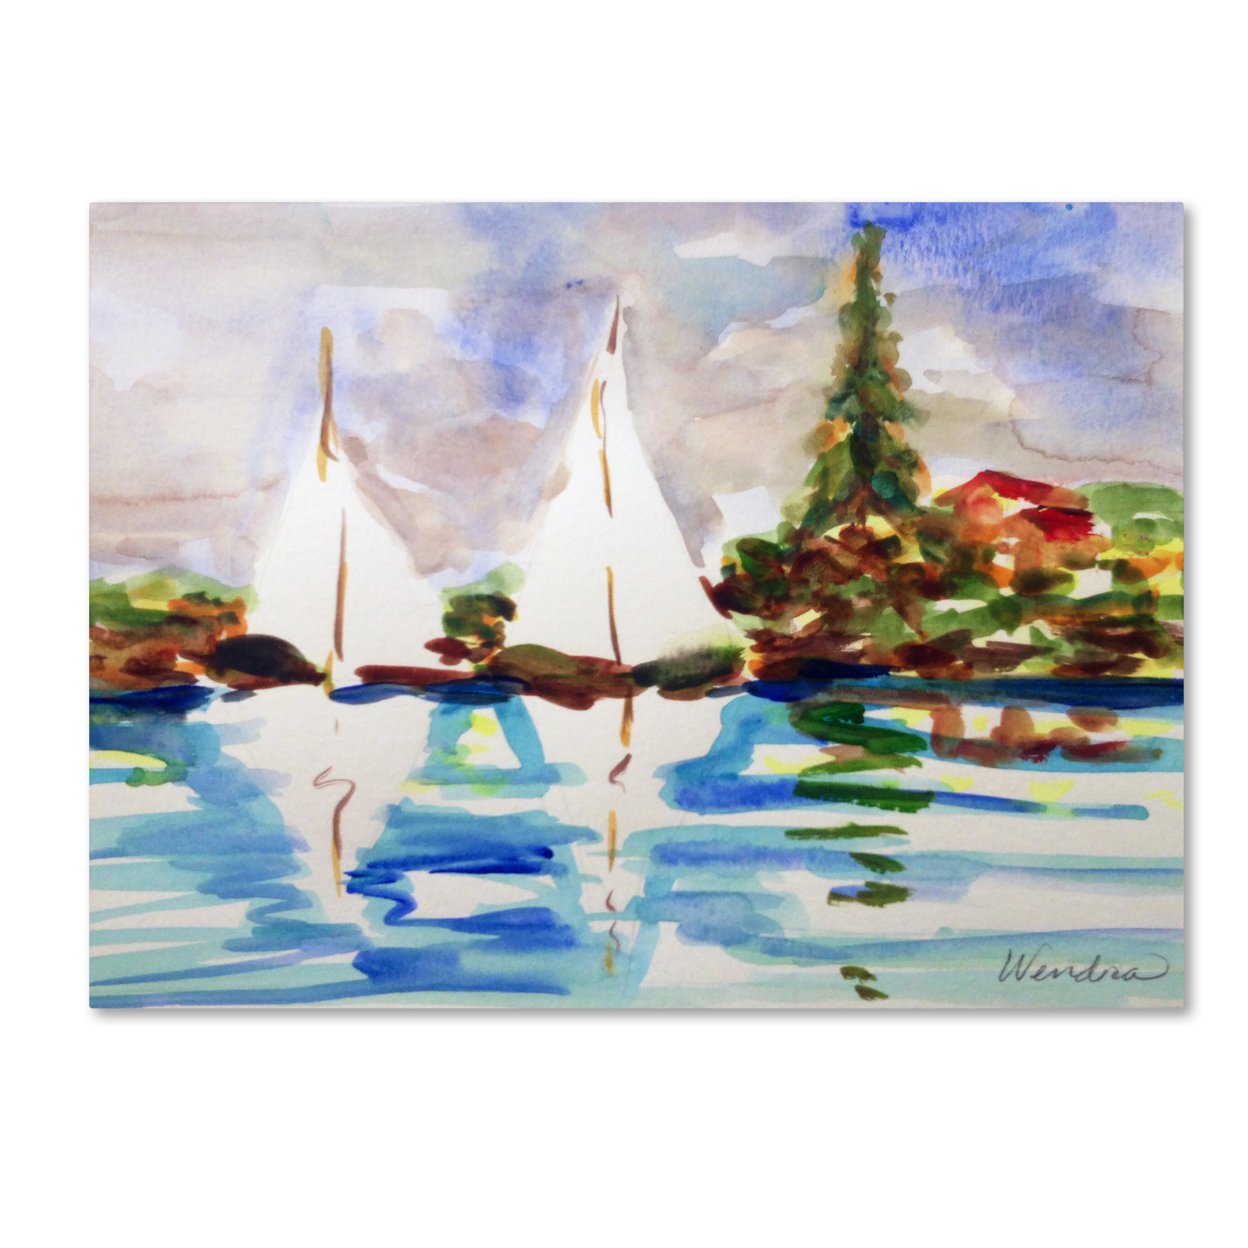 Wendra 'A Lovely Day' Canvas Wall Art 35 X 47 Inches